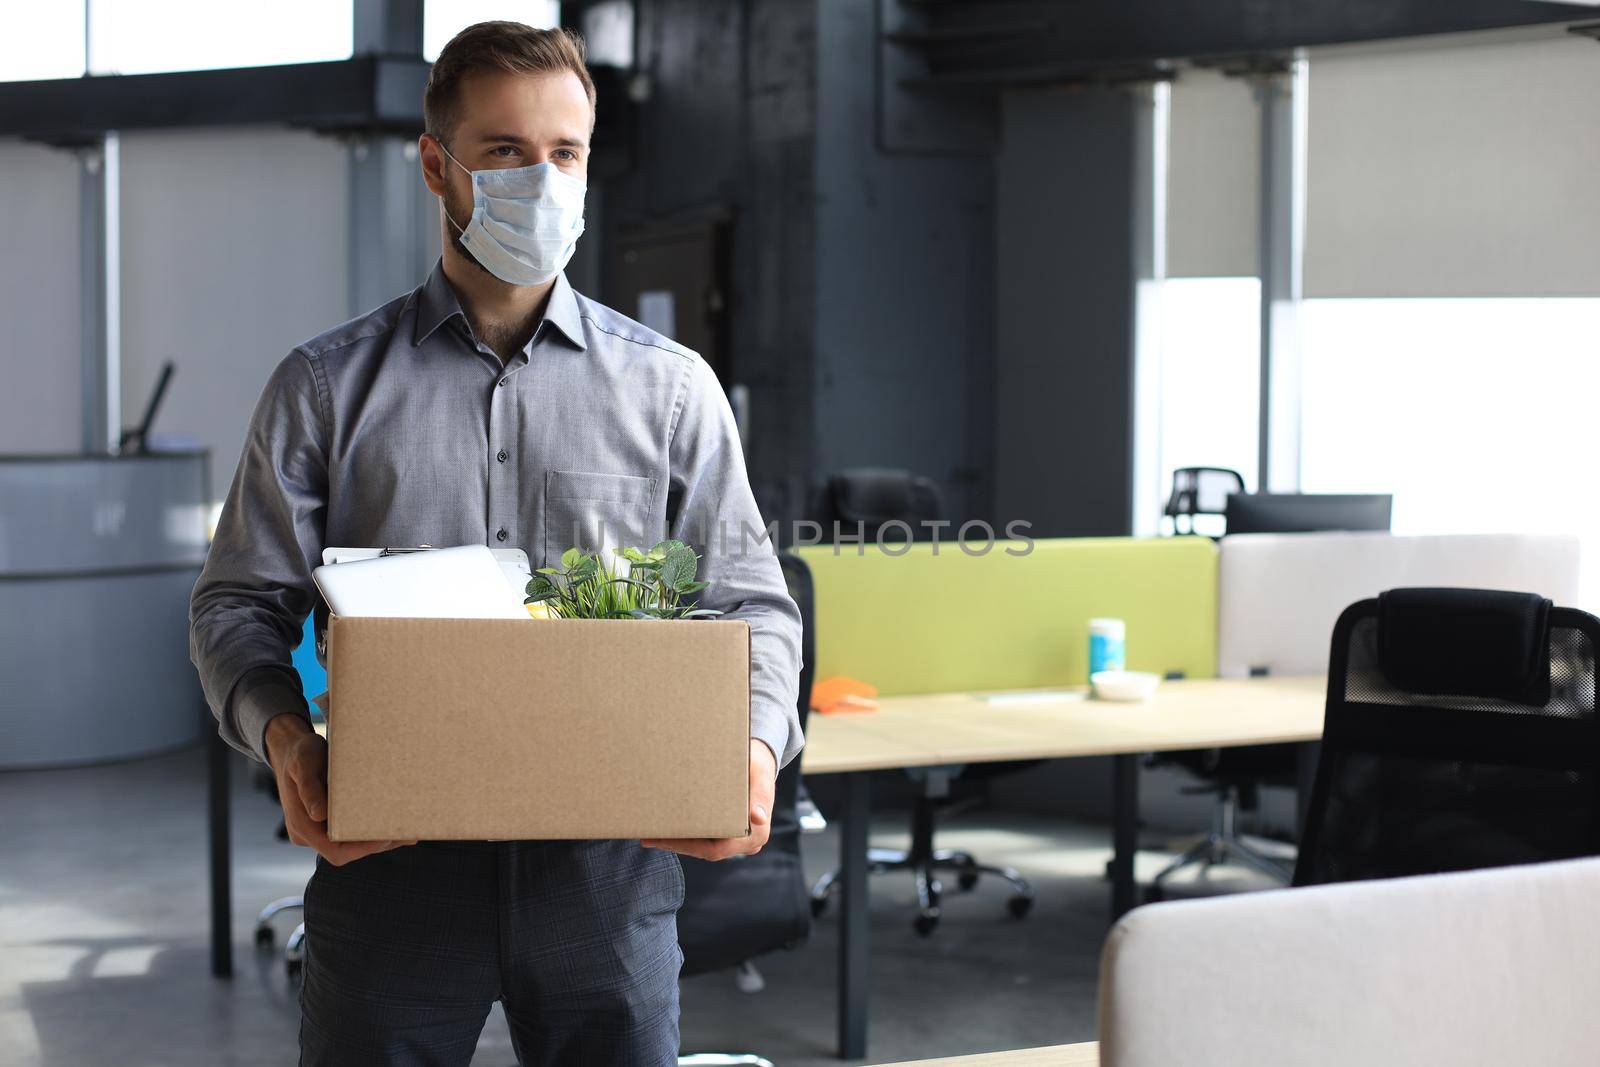 Dismissal employee in an epidemic coronavirus covid-19. Dismissed worker going from the office with his office supplies